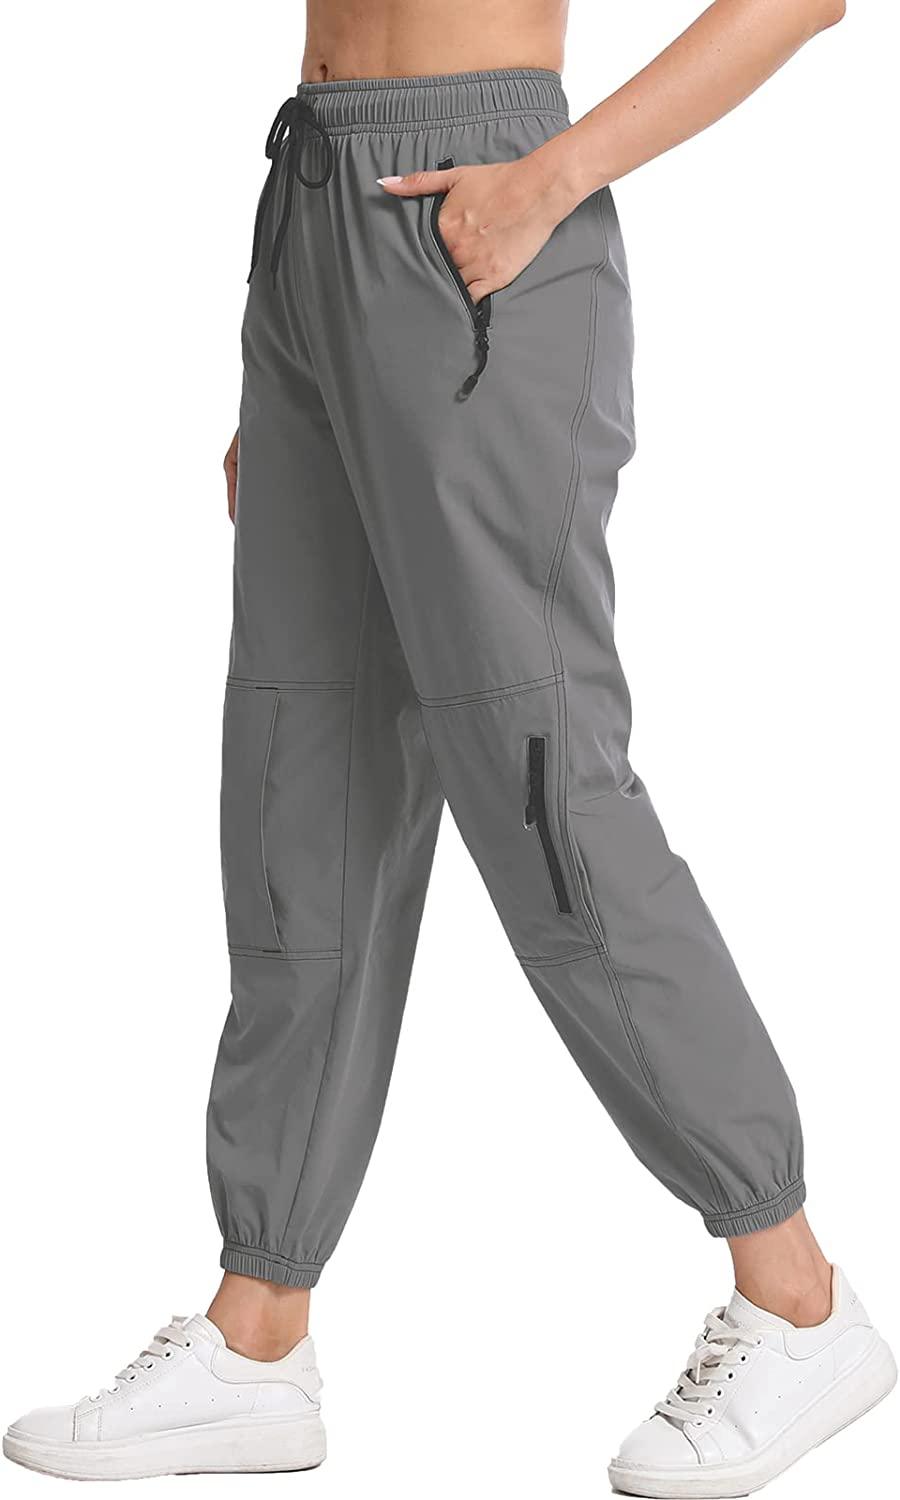 StaySlim Women's Waterproof Trousers - Lightweight Zip Off Hiking Pants  with UV Protection & Zip Pockets